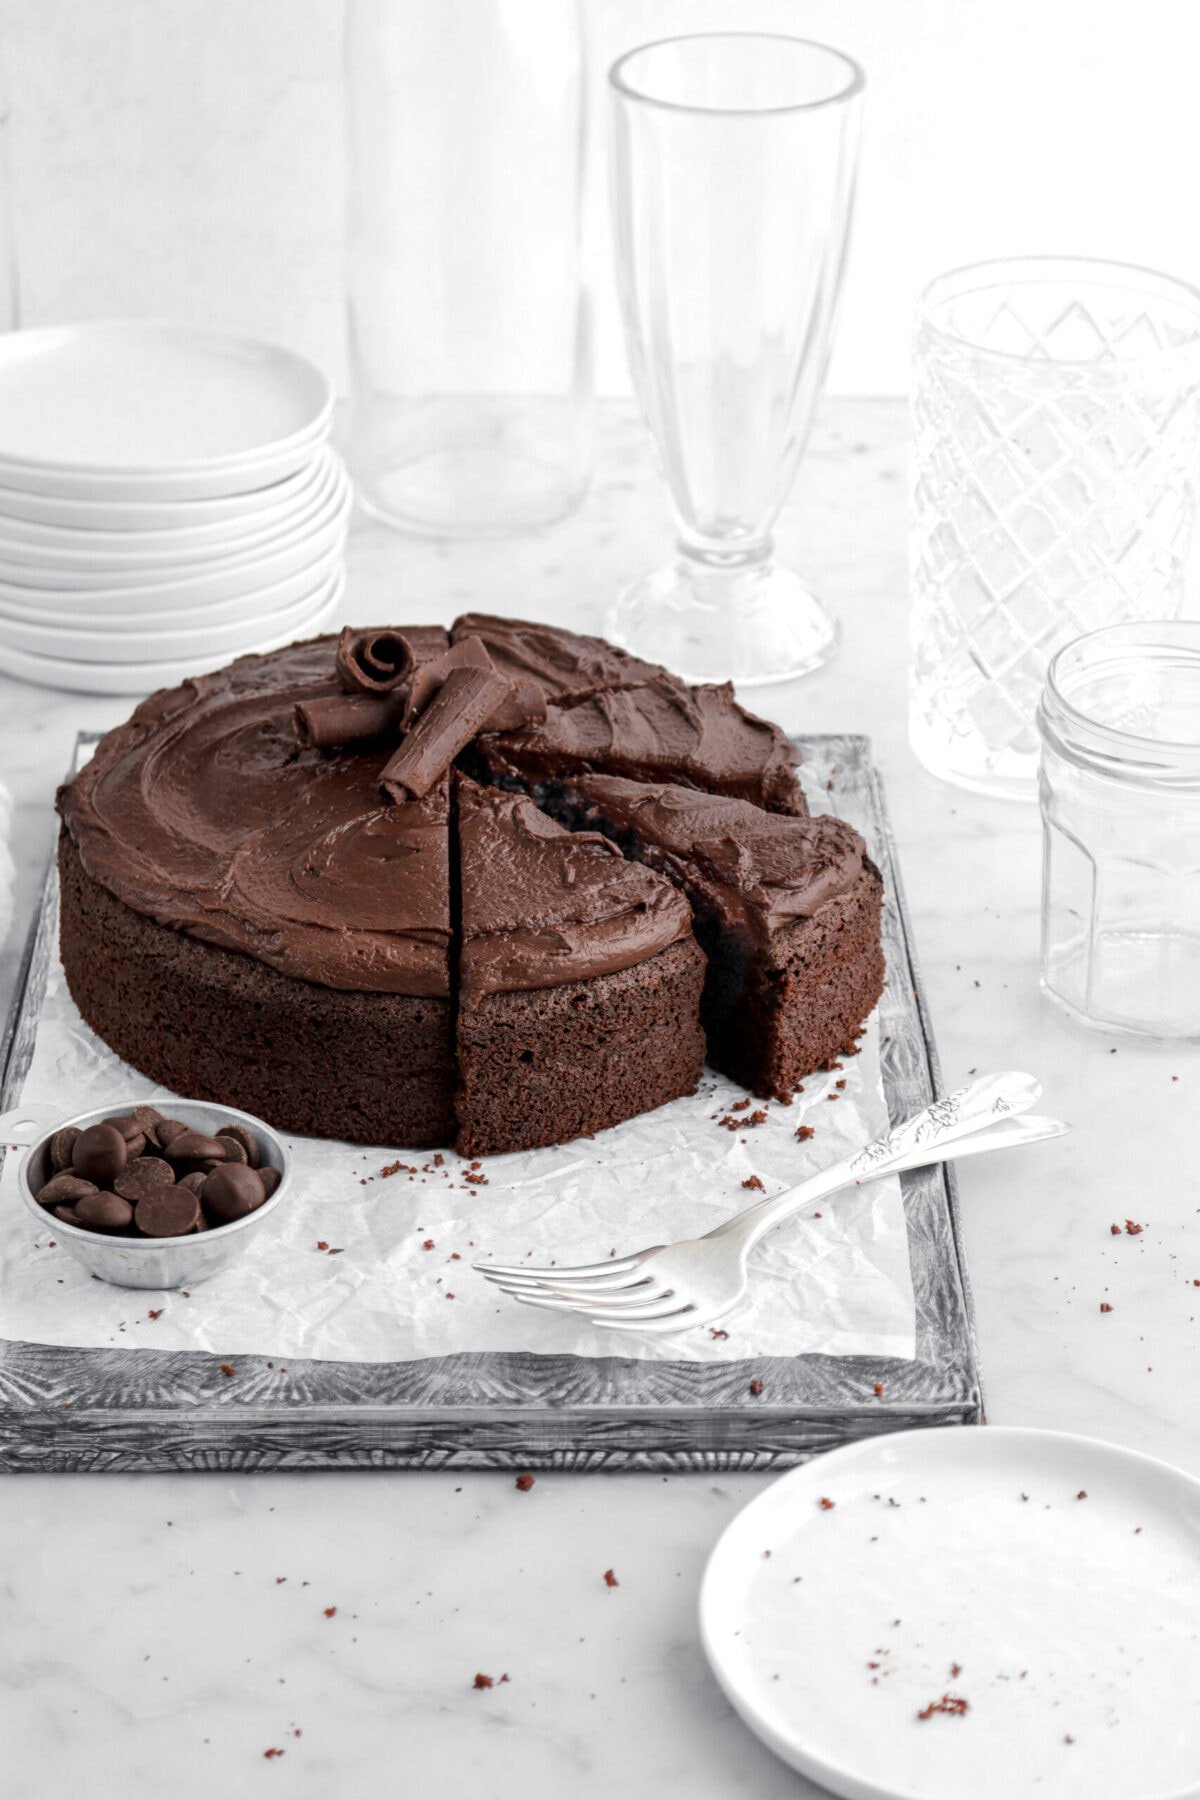 cropped image of chocolate fudge cake with four slices cut into it with bowl of chocolate chips and two forks in front.